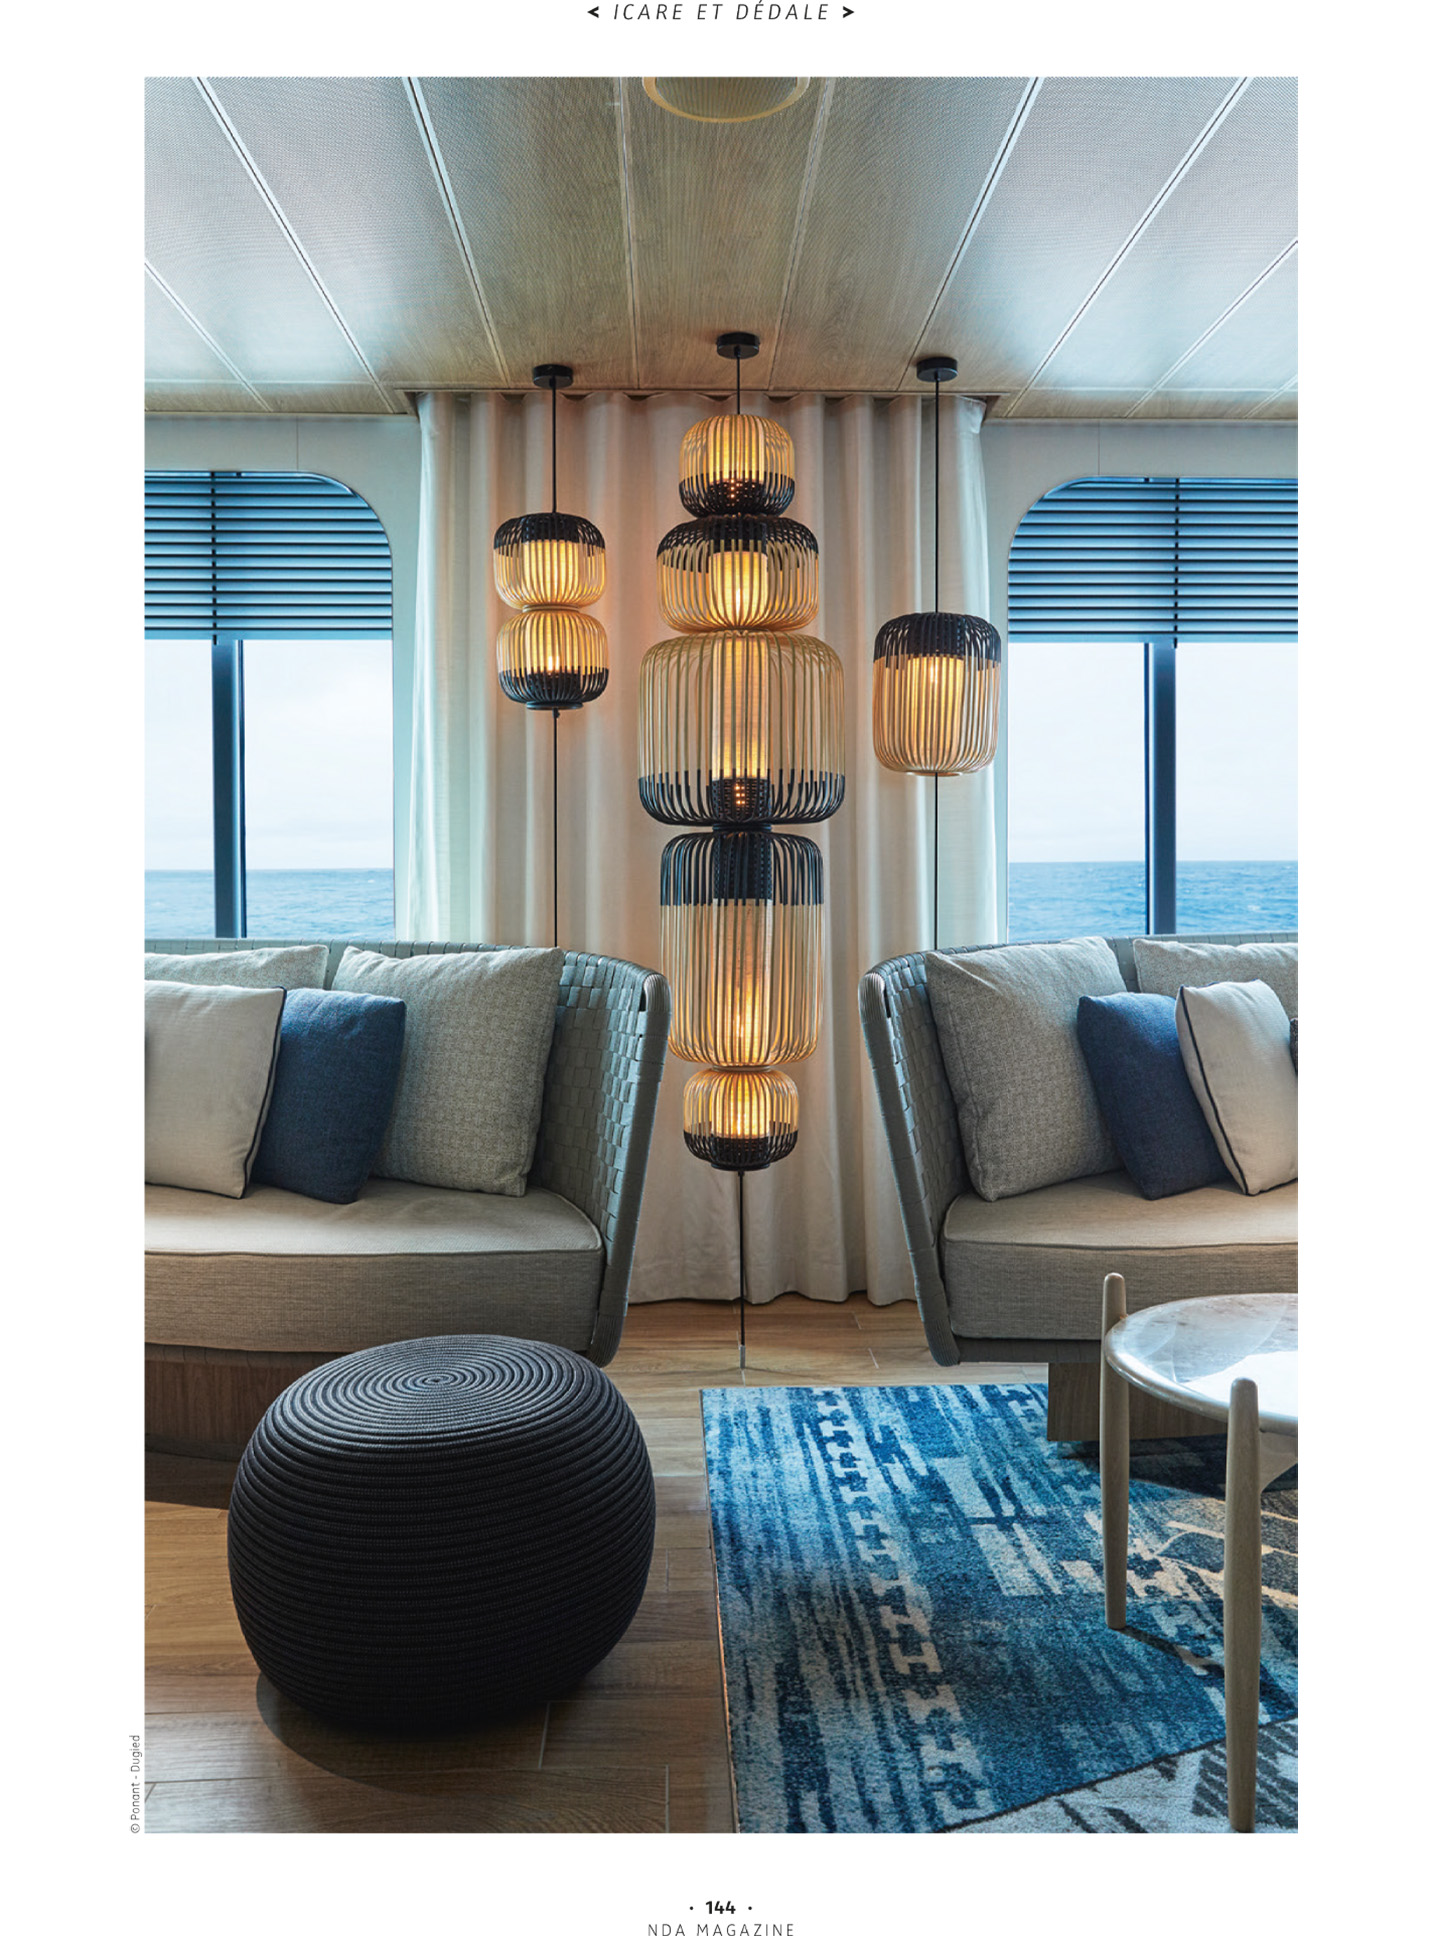 Article on the Champlain Ponant Explorers realized by the studio jean-Philippe Nuel in the magazine NDA, luxury cruise ship, maritime exploration